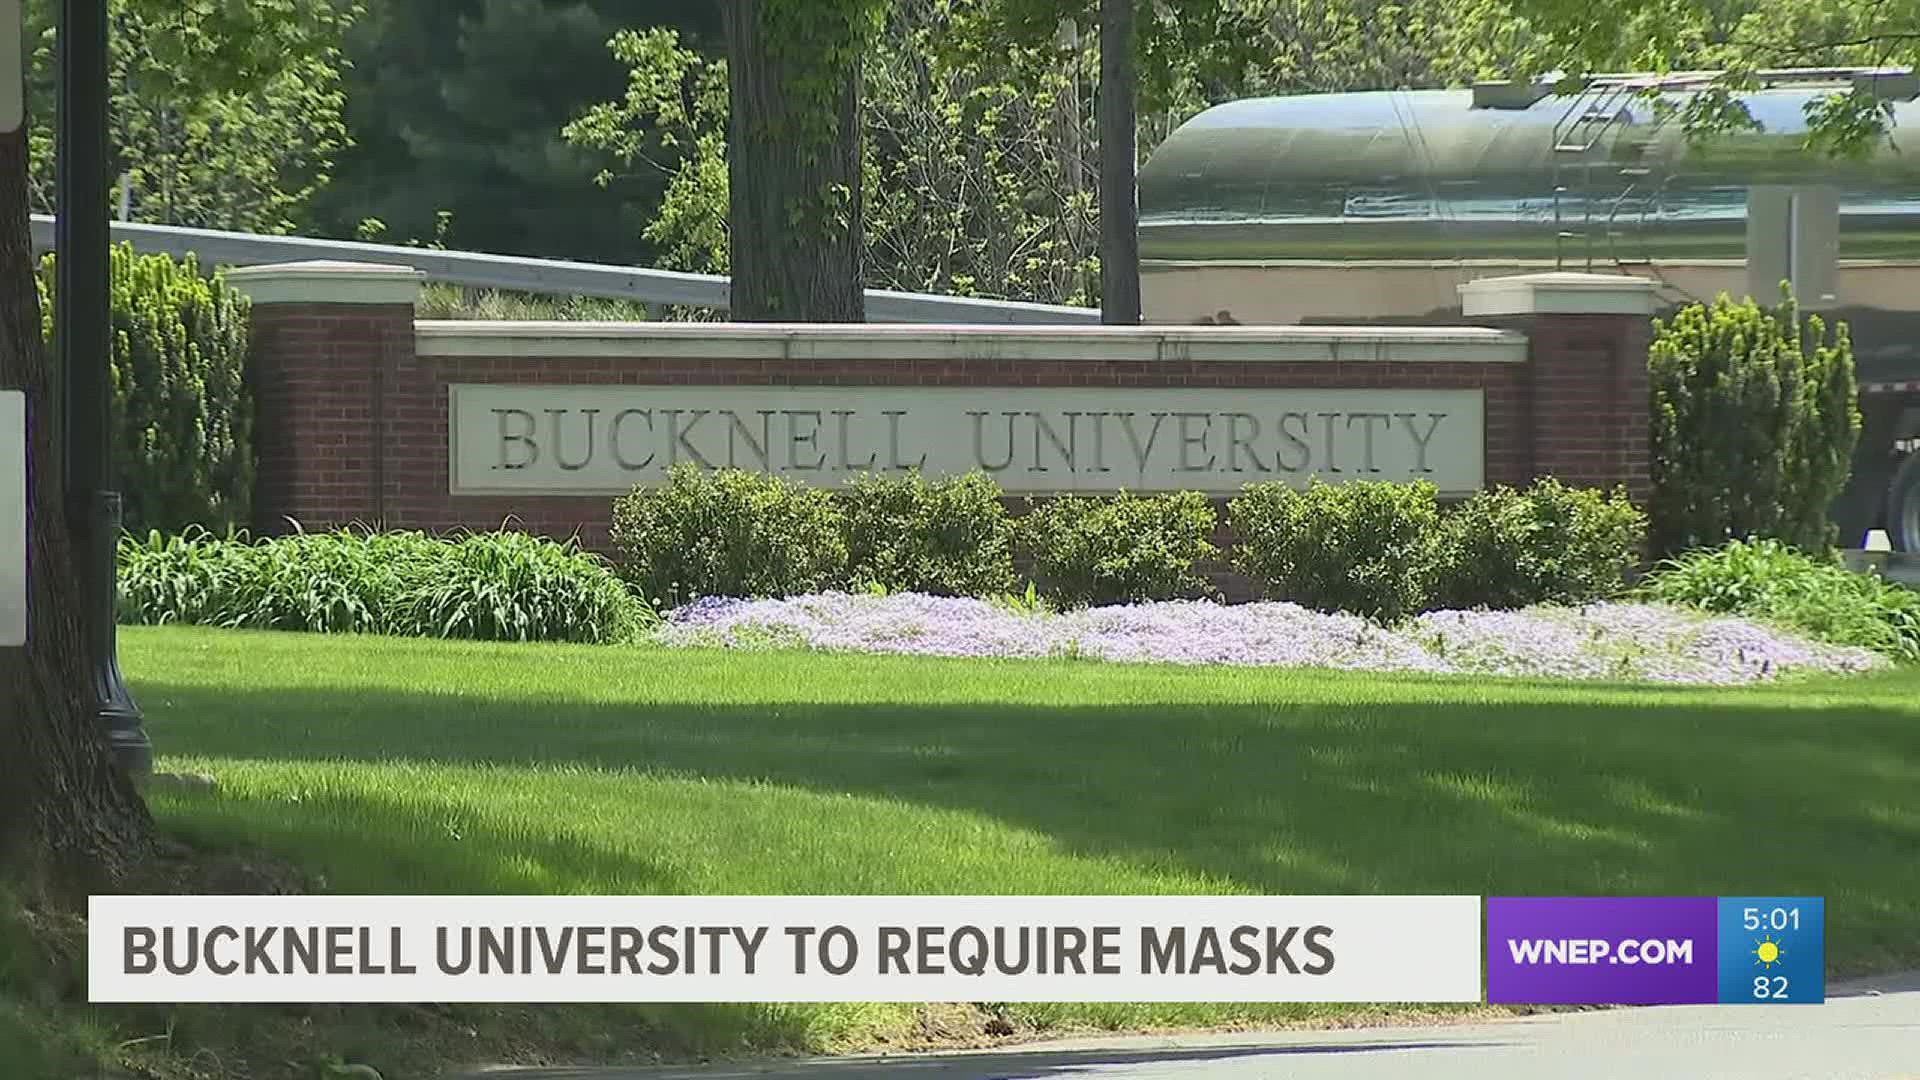 Because of the increase in COVID-19 cases, a number of colleges and universities are now requiring masks on campus again.